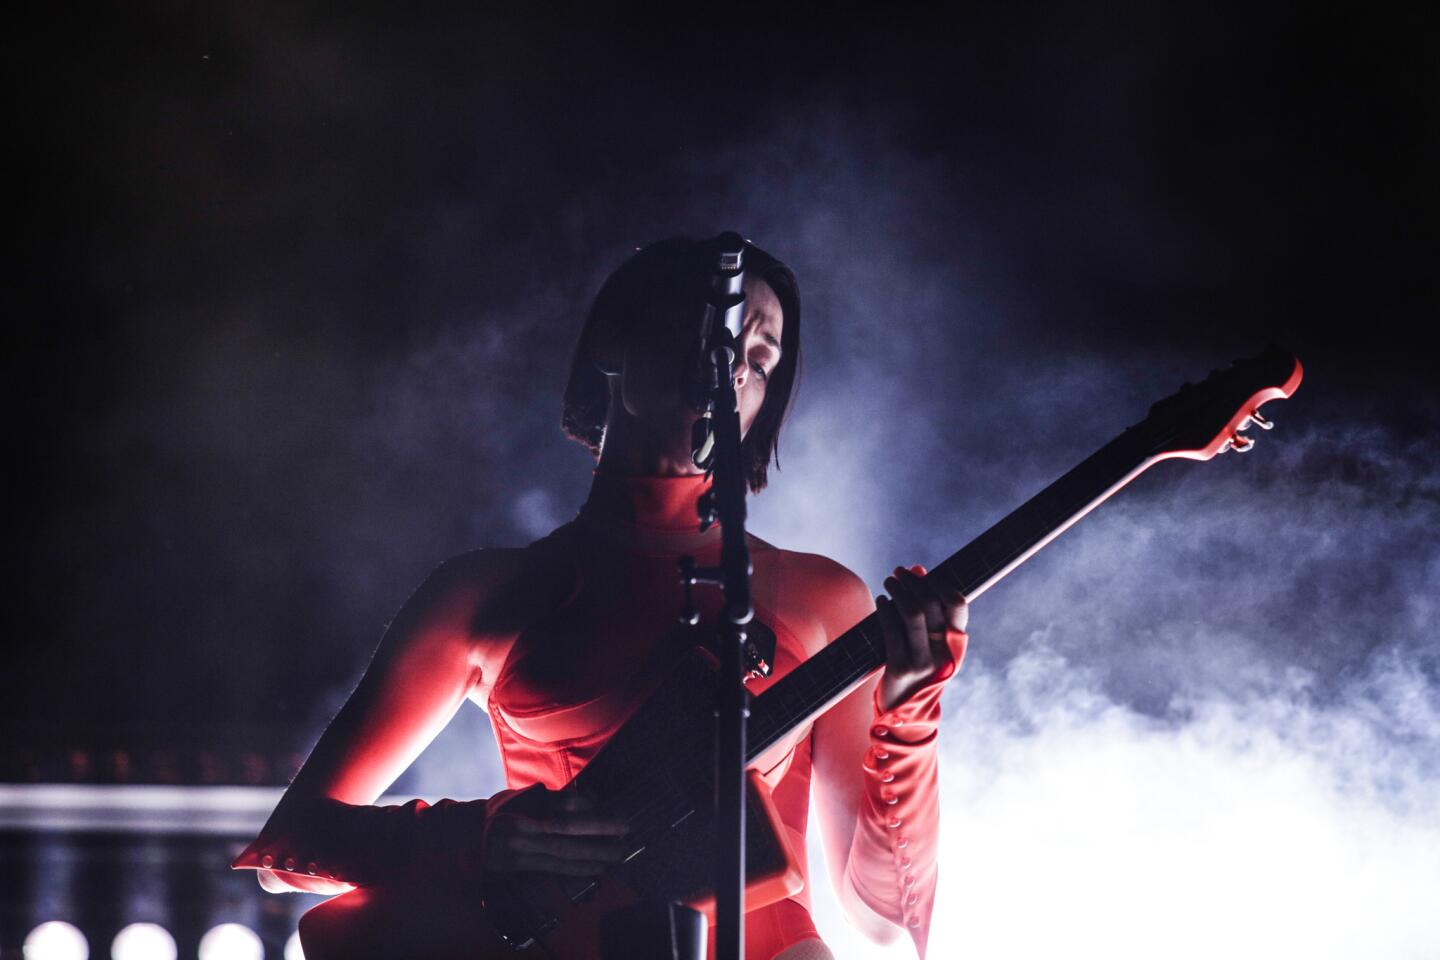 St. Vincent performs at Coachella during Week 2, 2018.